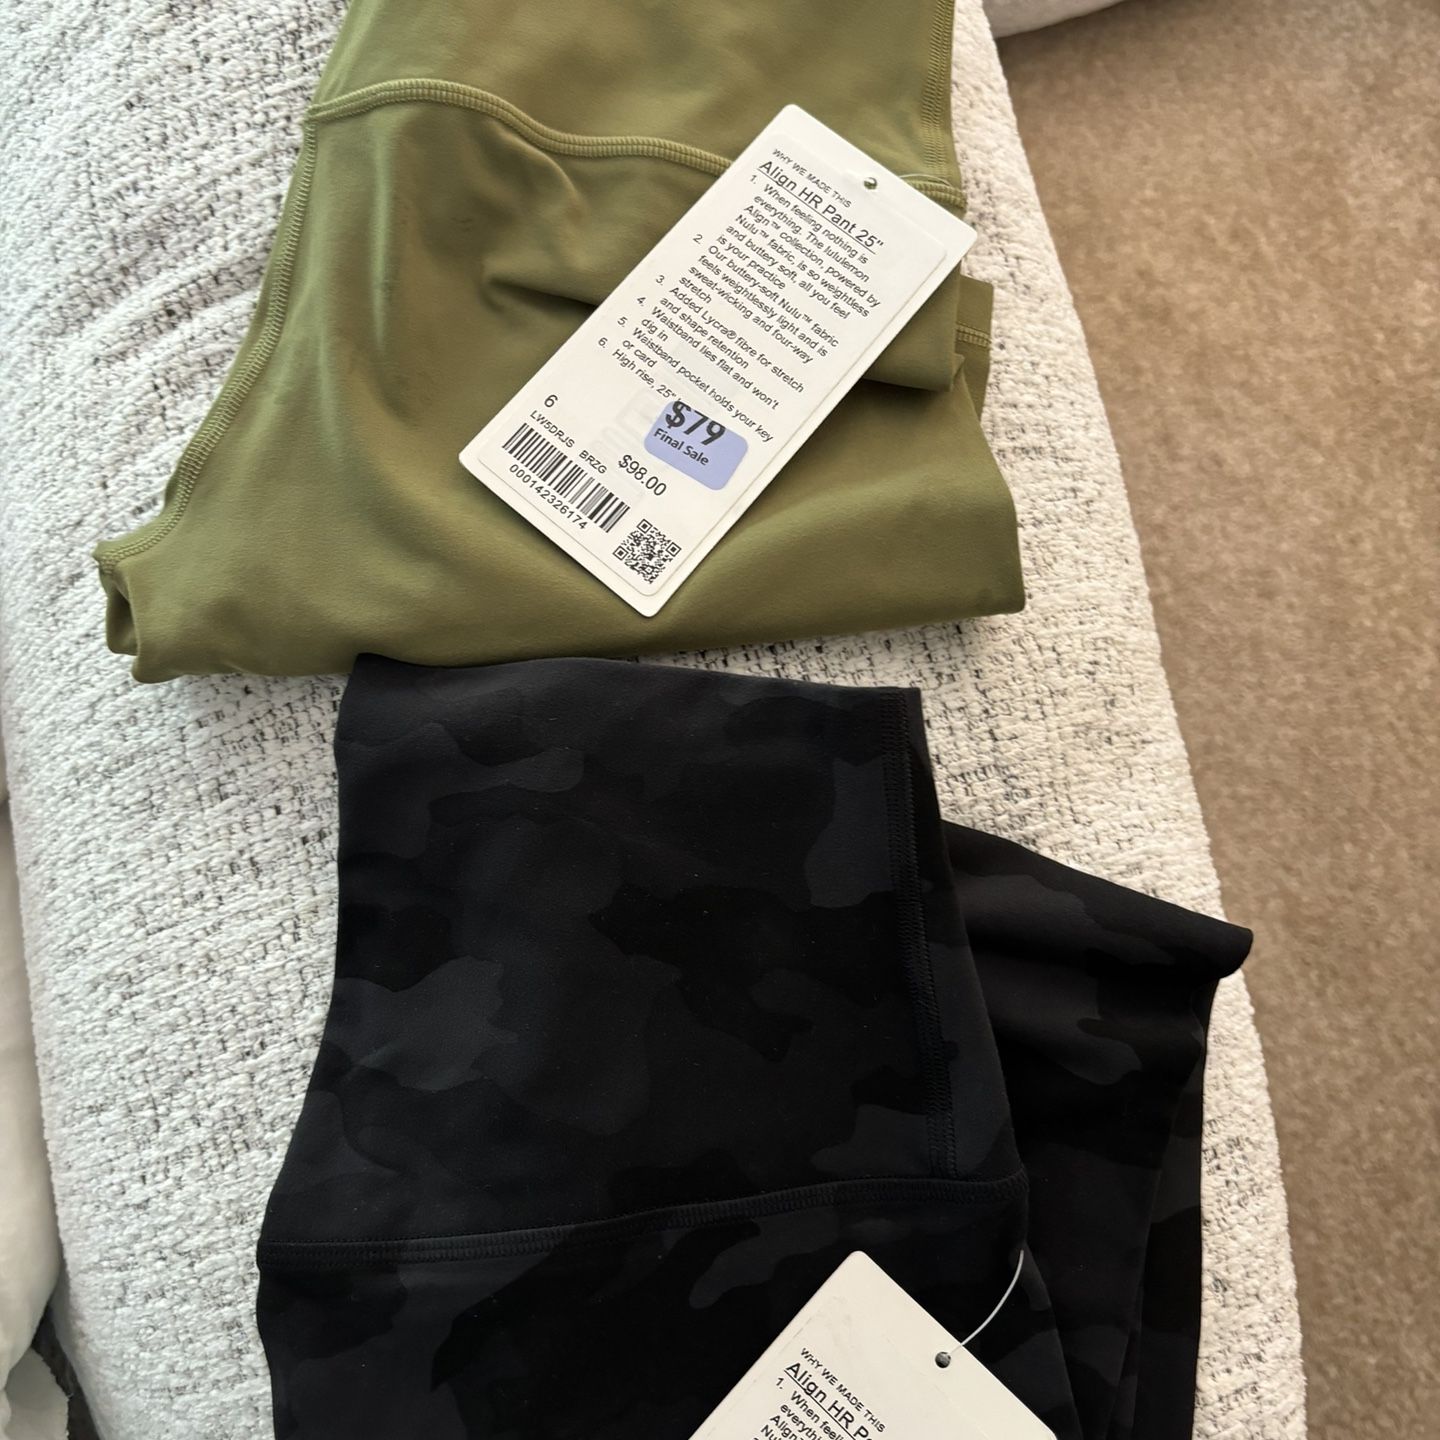 NWT Lululemon Spring Cleaning - Will Ship For A Small Charge 